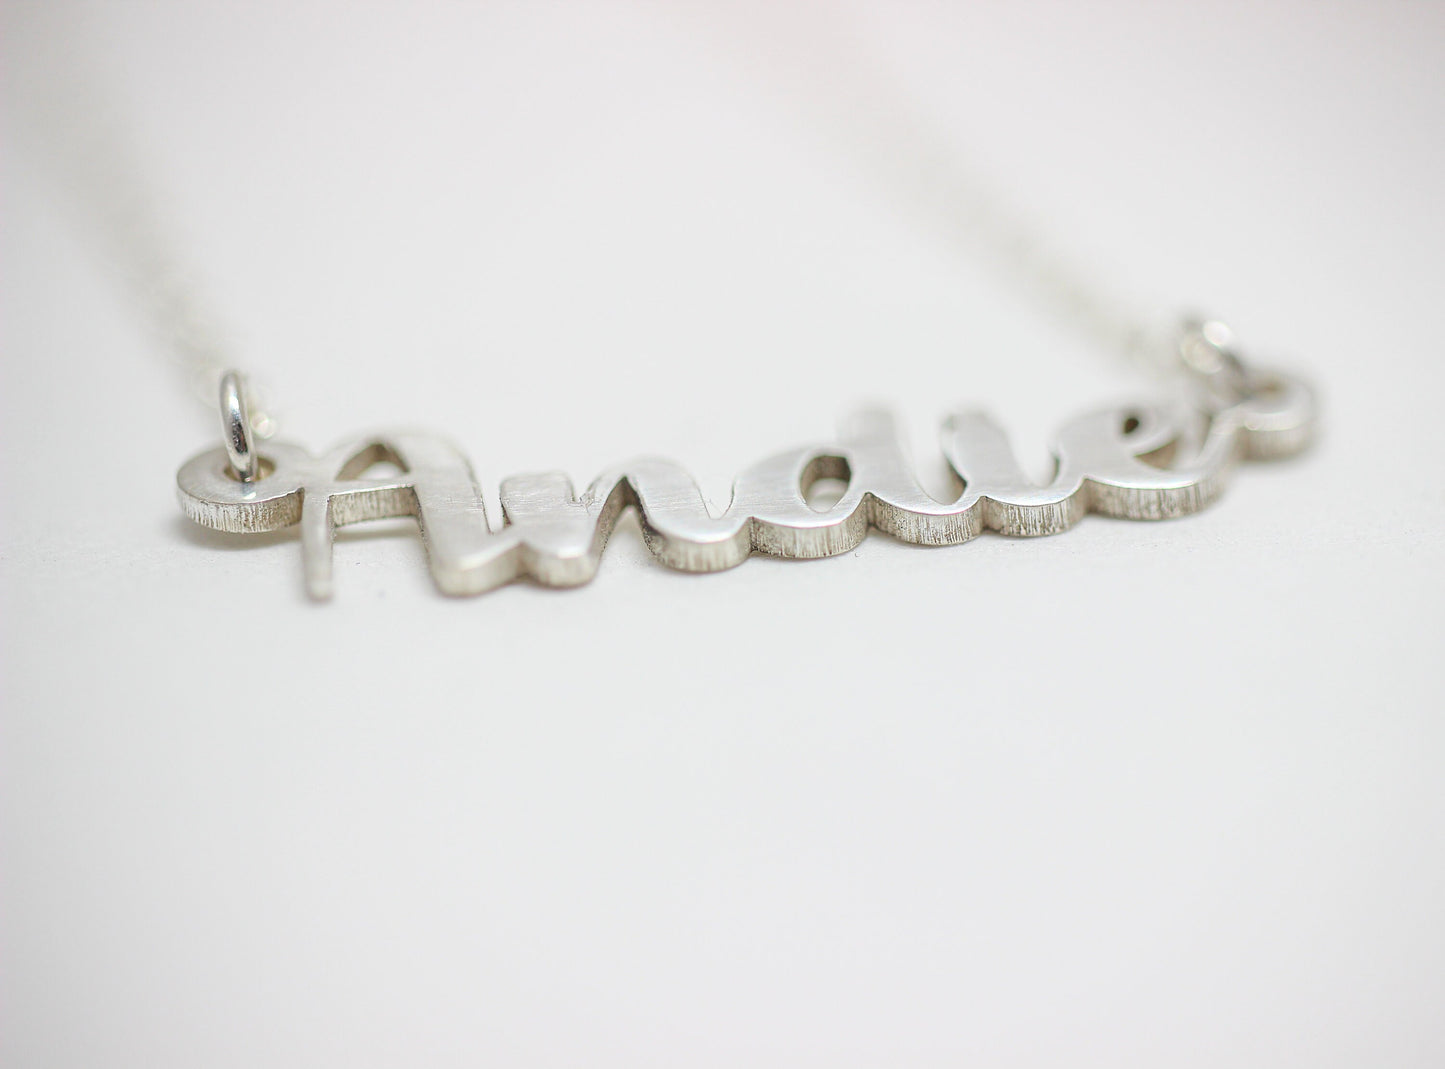 Personalized Name Necklace // Sterling Silver Word Necklace // Custom Personalized Jewelry Christmas Gift for Her